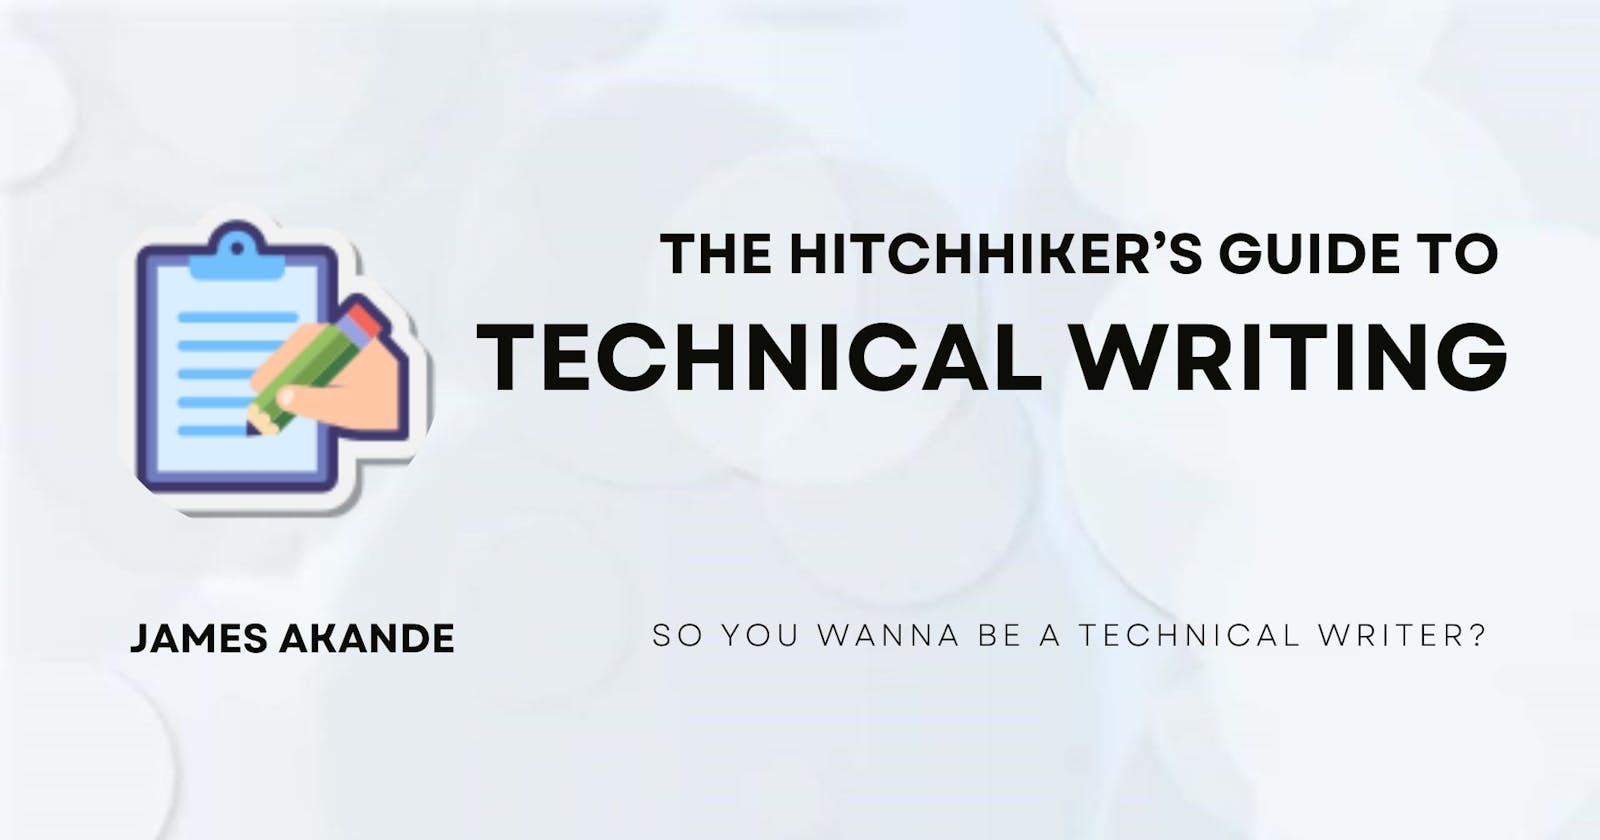 The Hitchhiker's Guide To Technical Writing